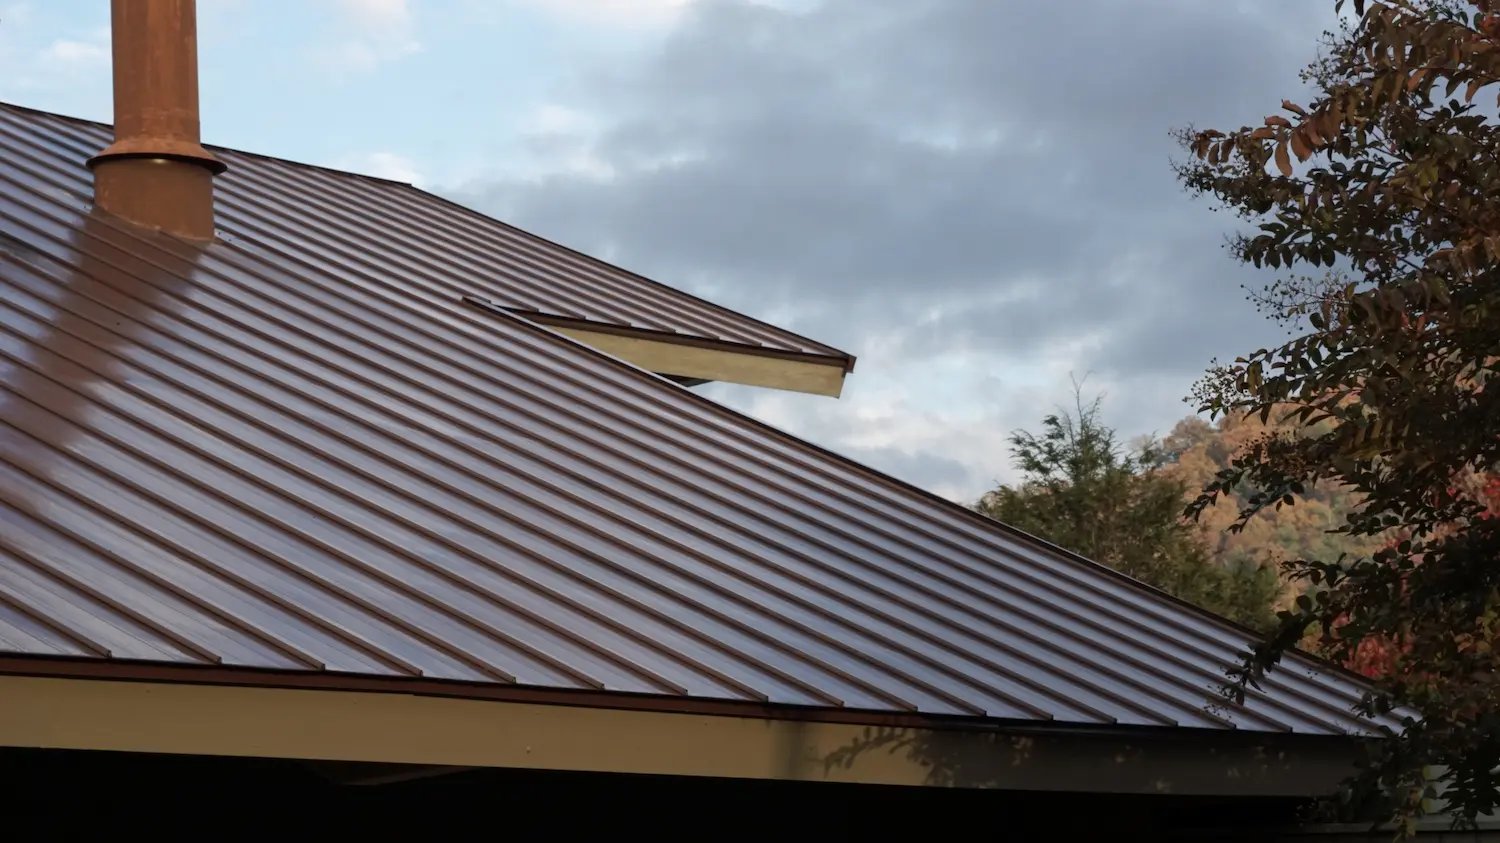 A close up of a metal roof